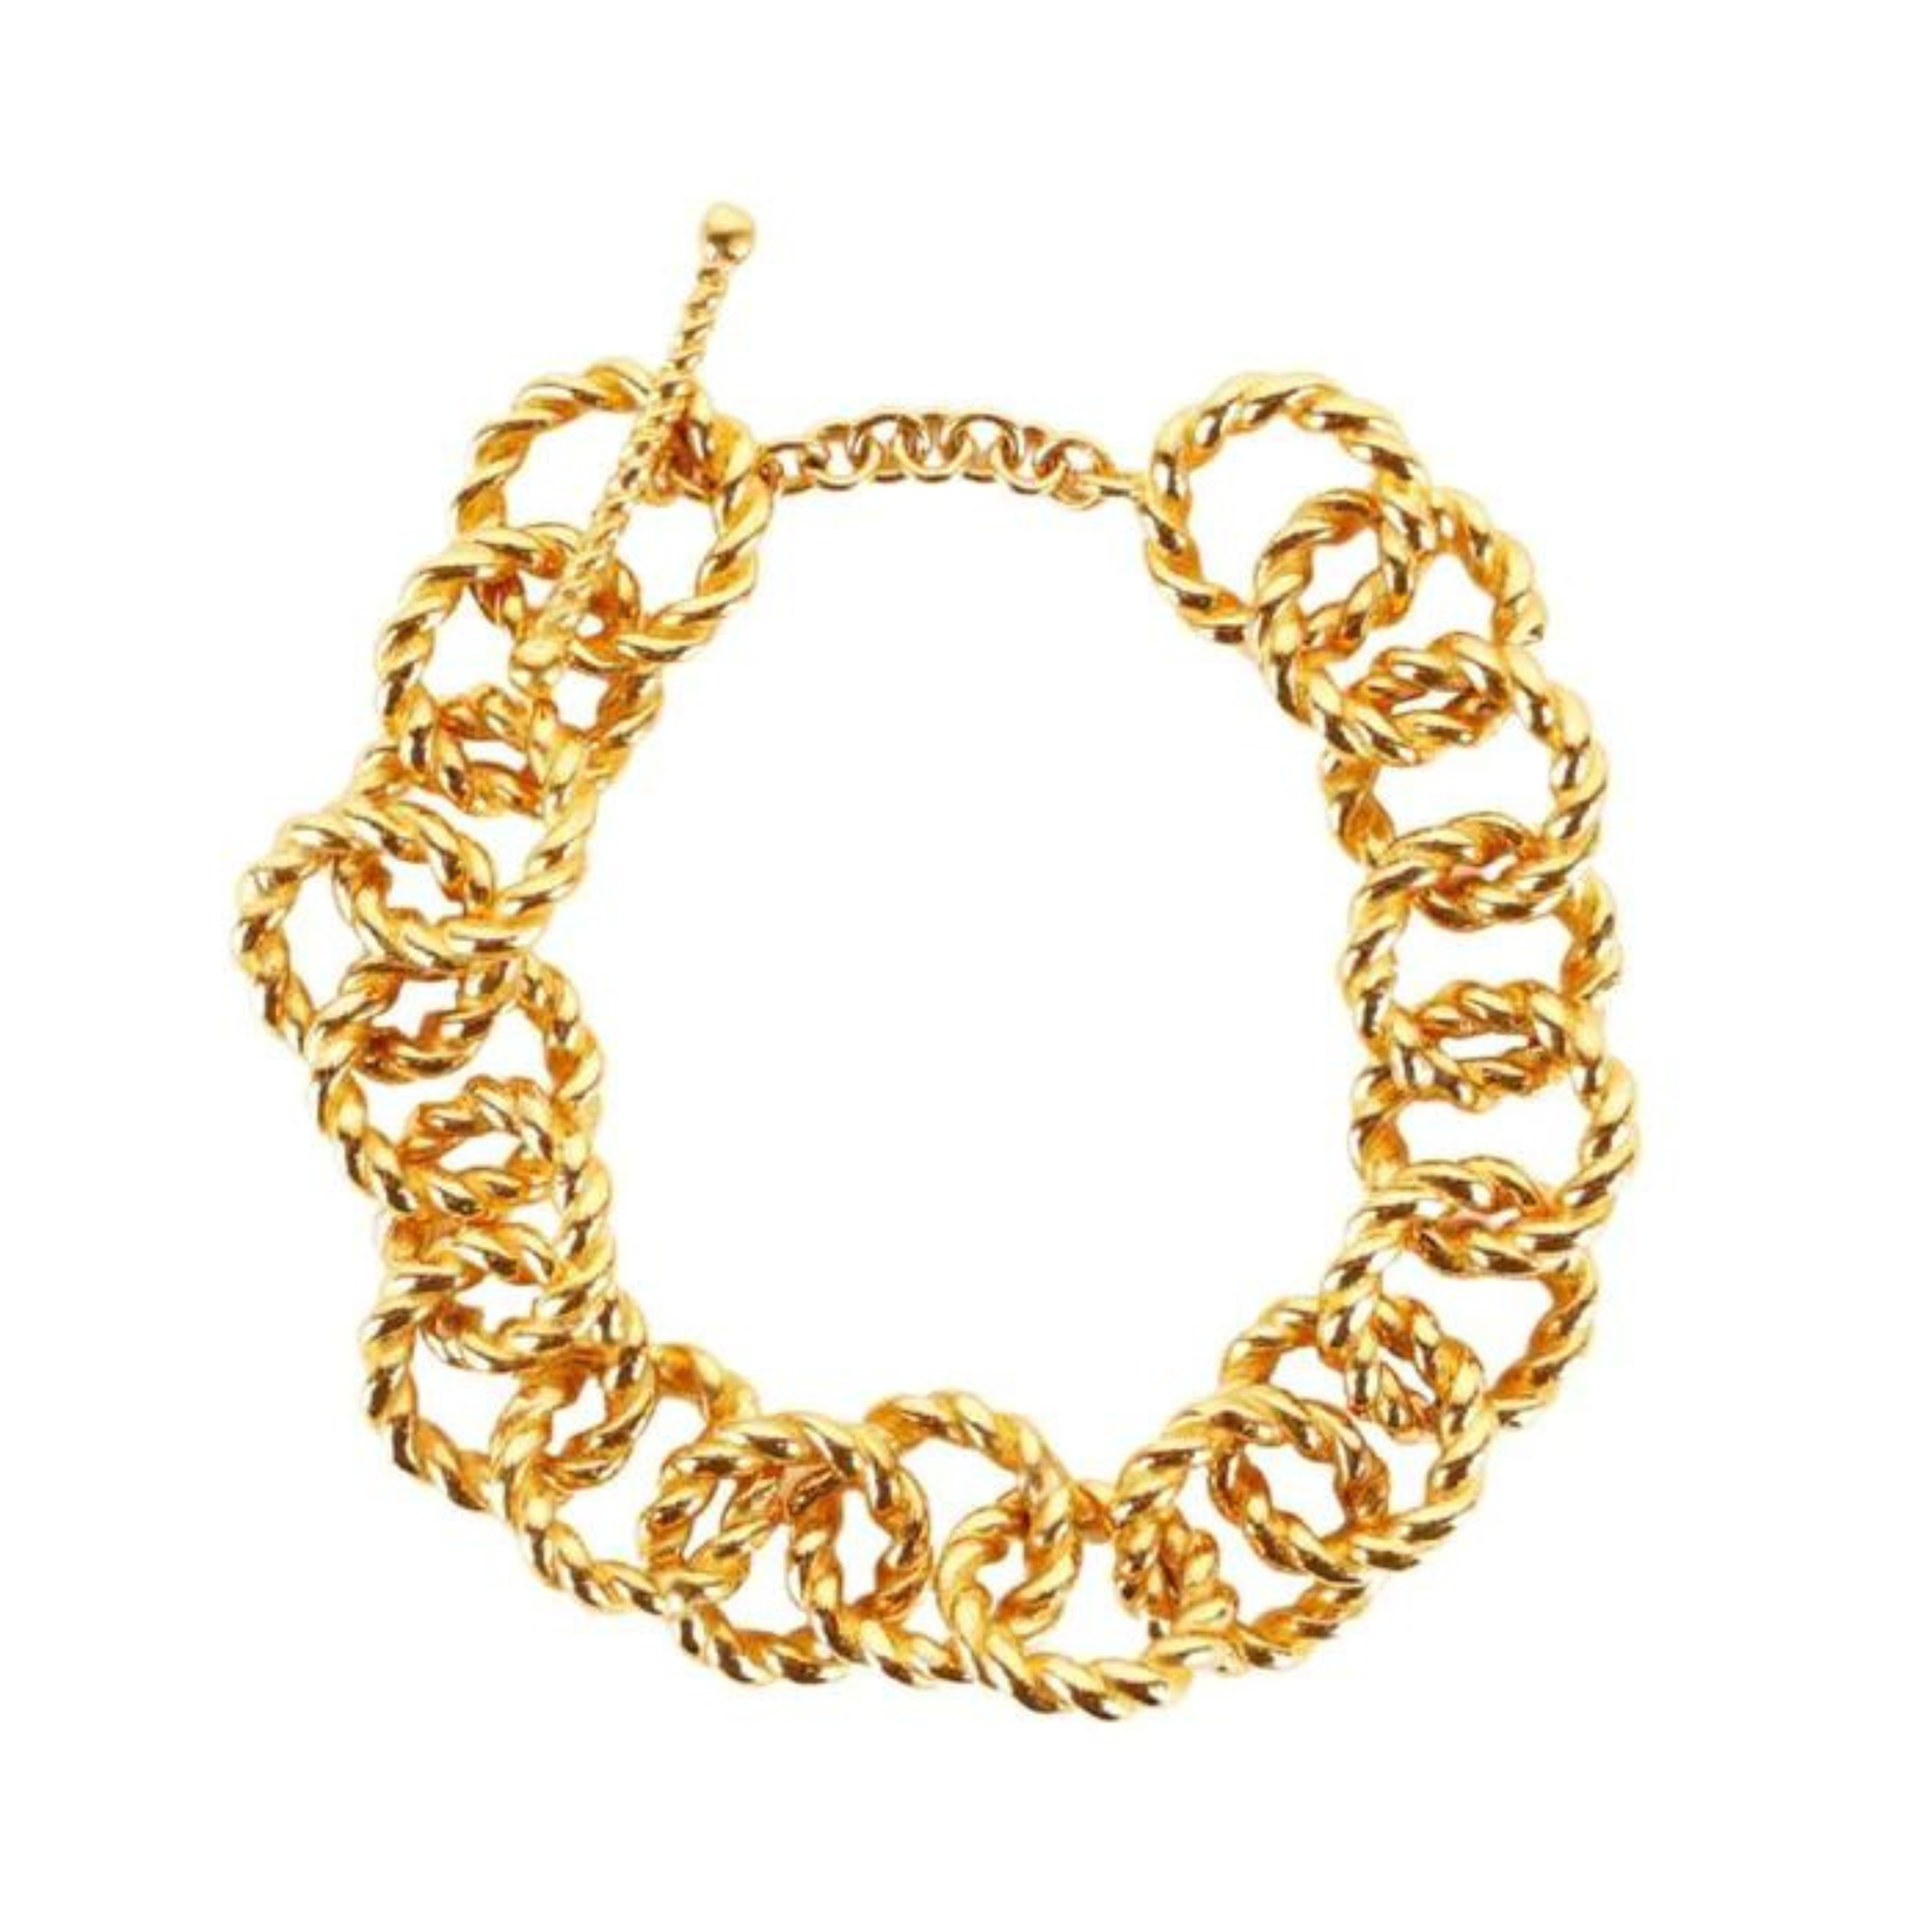 Textured, gold chain bracelet with a toggle clasp pictured on a white background. 